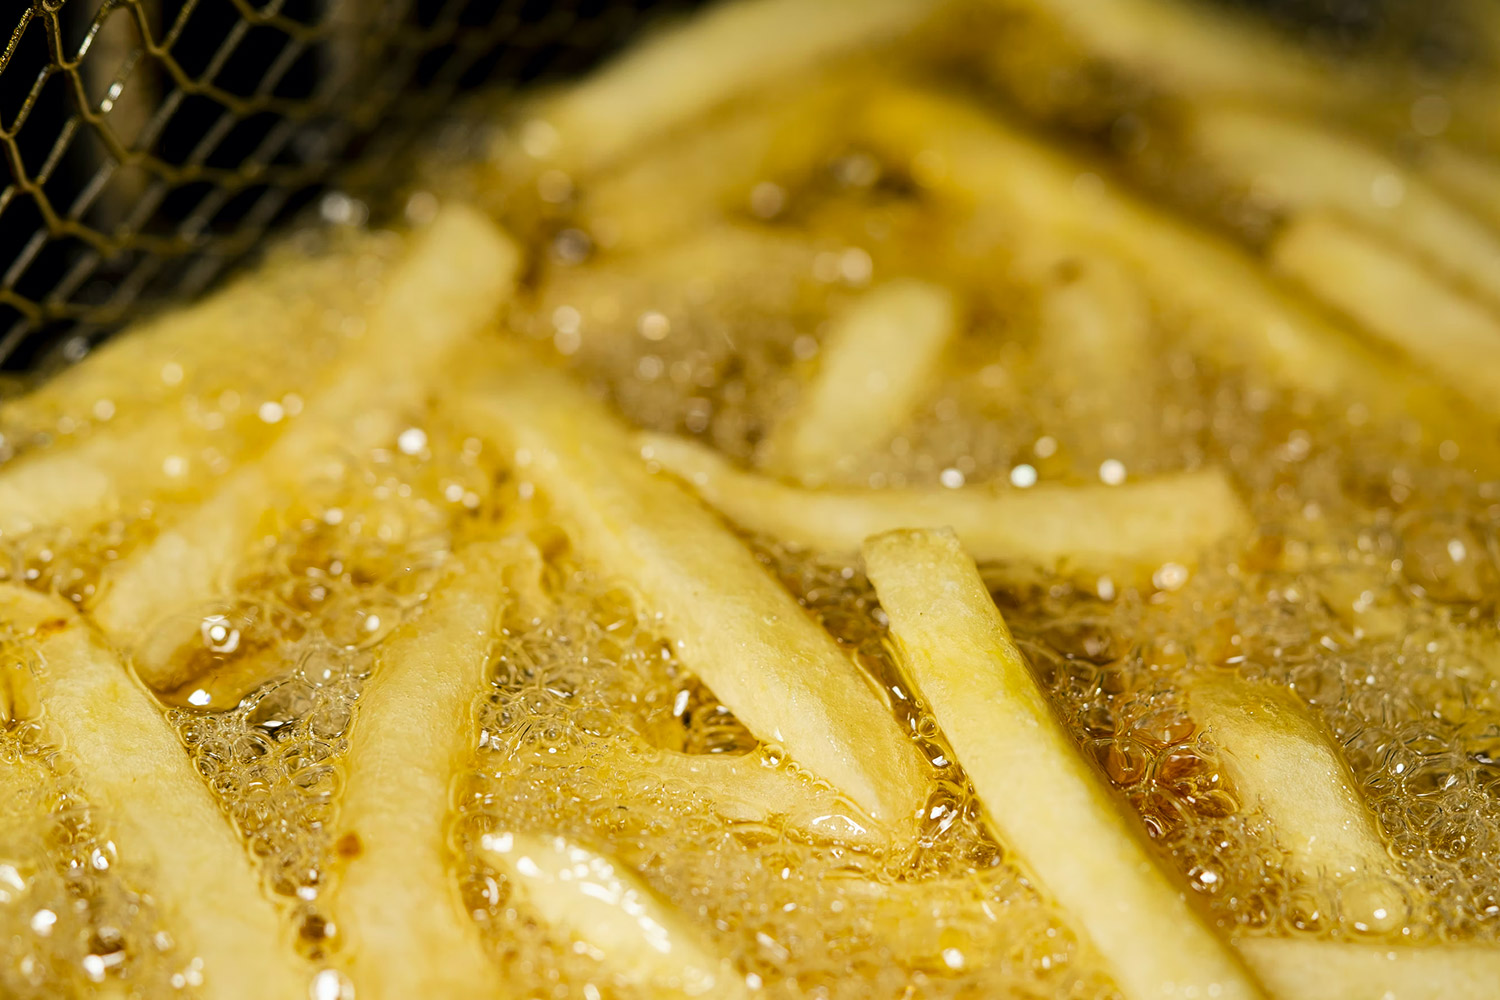 French fries are deep fried in a hot fryer until crispy